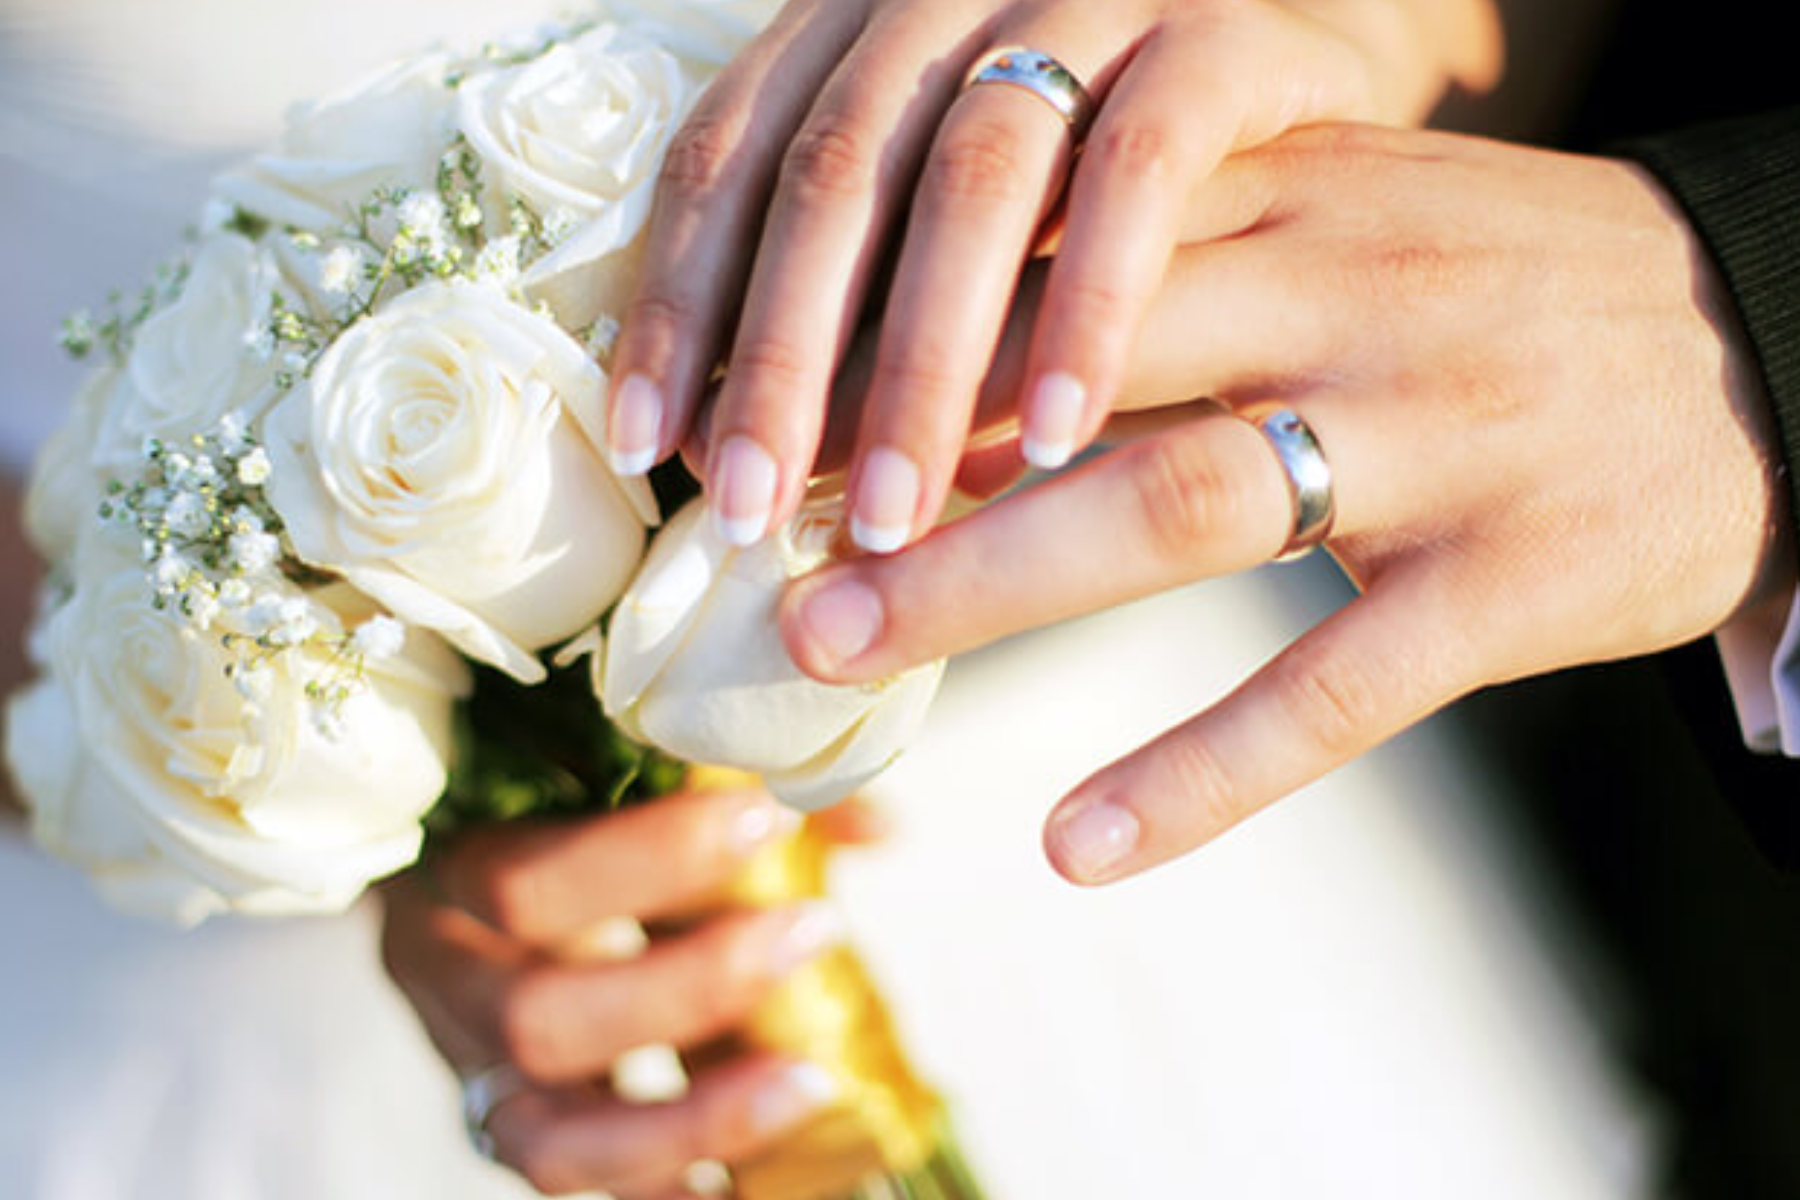 Hands of a wedded couple holding a bouquet and rings